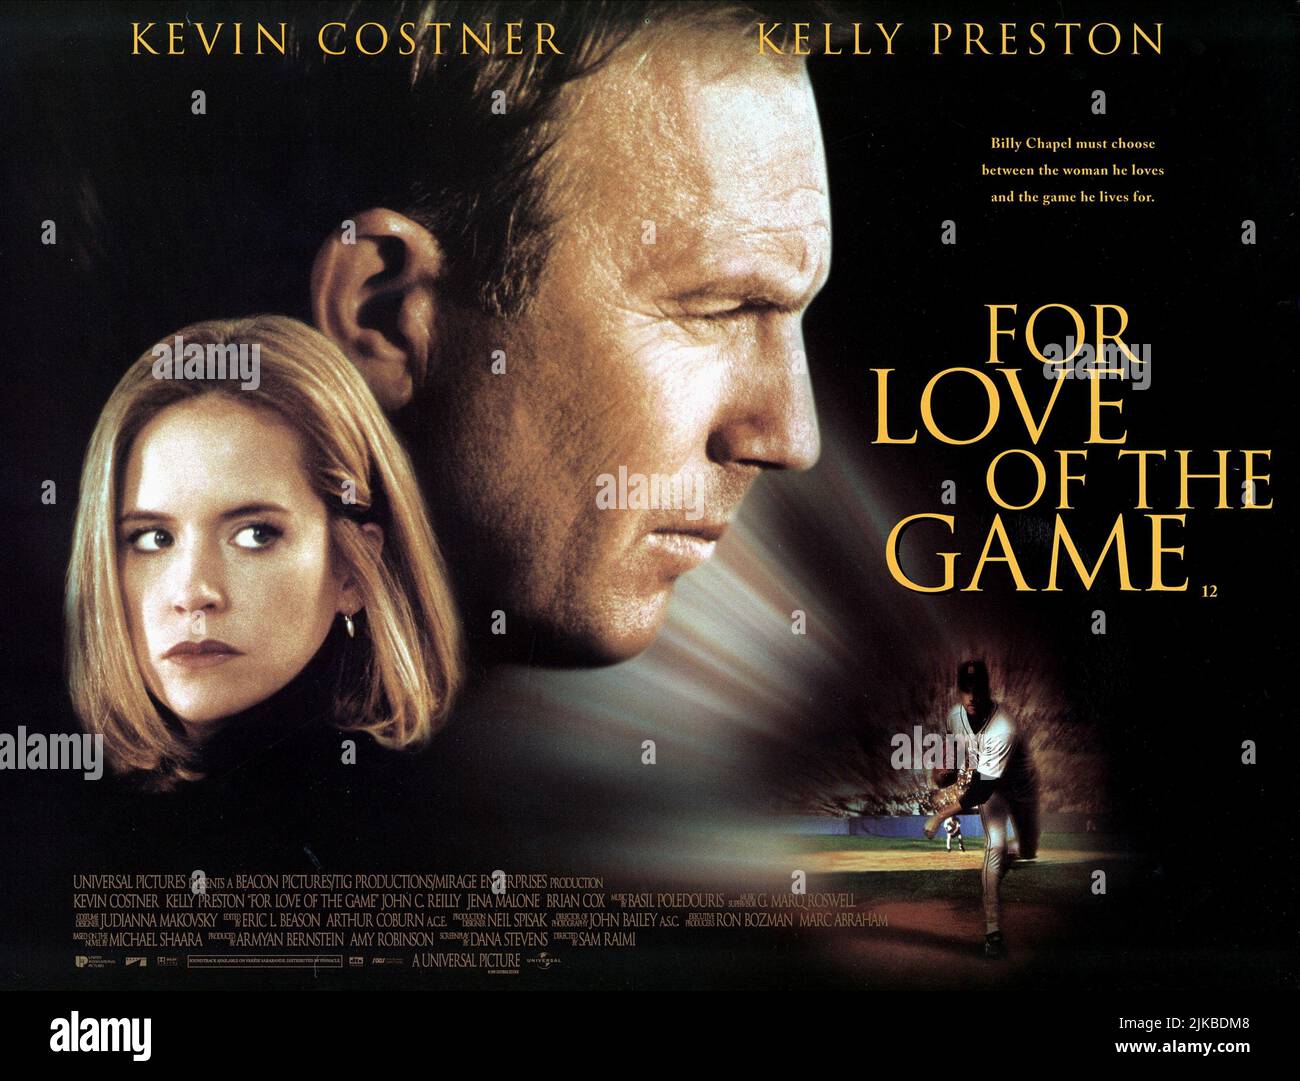 https://c8.alamy.com/comp/2JKBDM8/kelly-preston-kevin-costner-poster-film-for-love-of-the-game-usa-1999-characters-jane-aubrey-billy-chapel-director-sam-raimi-15-september-1999-warning-this-photograph-is-for-editorial-use-only-and-is-the-copyright-of-universal-pictures-andor-the-photographer-assigned-by-the-film-or-production-company-and-can-only-be-reproduced-by-publications-in-conjunction-with-the-promotion-of-the-above-film-a-mandatory-credit-to-universal-pictures-is-required-the-photographer-should-also-be-credited-when-known-no-commercial-use-can-be-granted-without-written-authority-from-the-film-compa-2JKBDM8.jpg